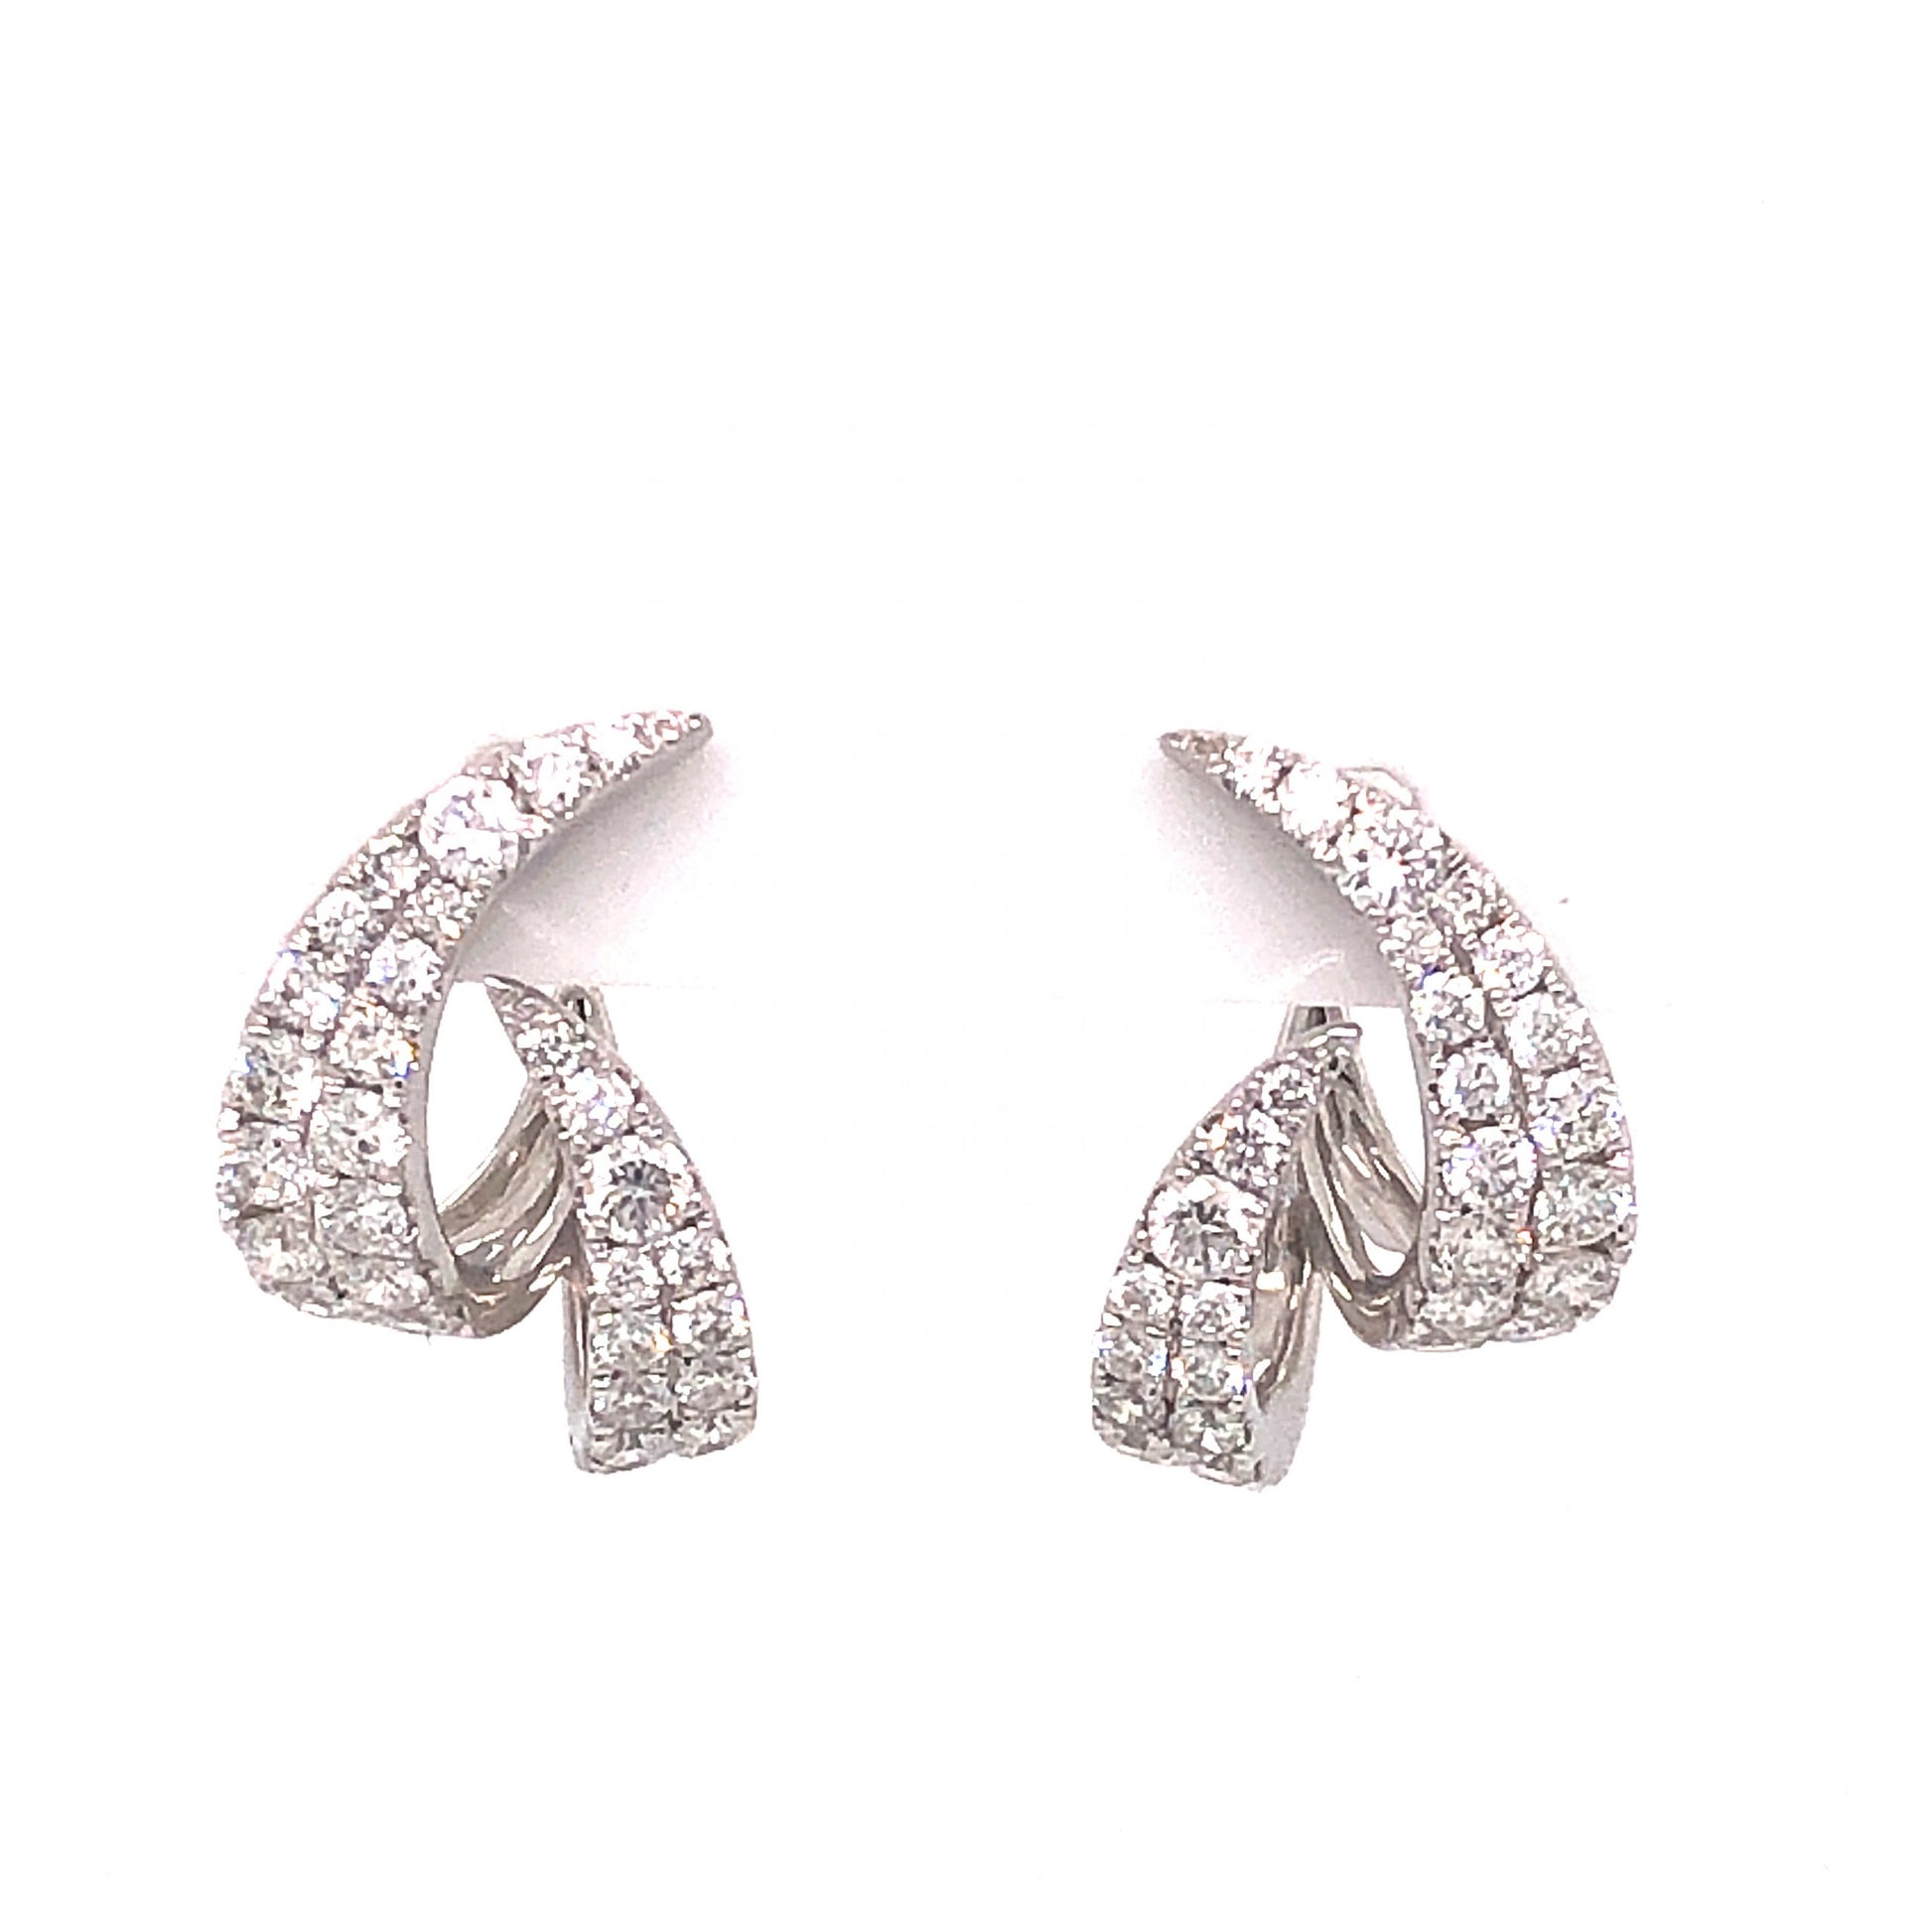 Bony Levy Pave Diamond Earring Studs in 18k White Gold